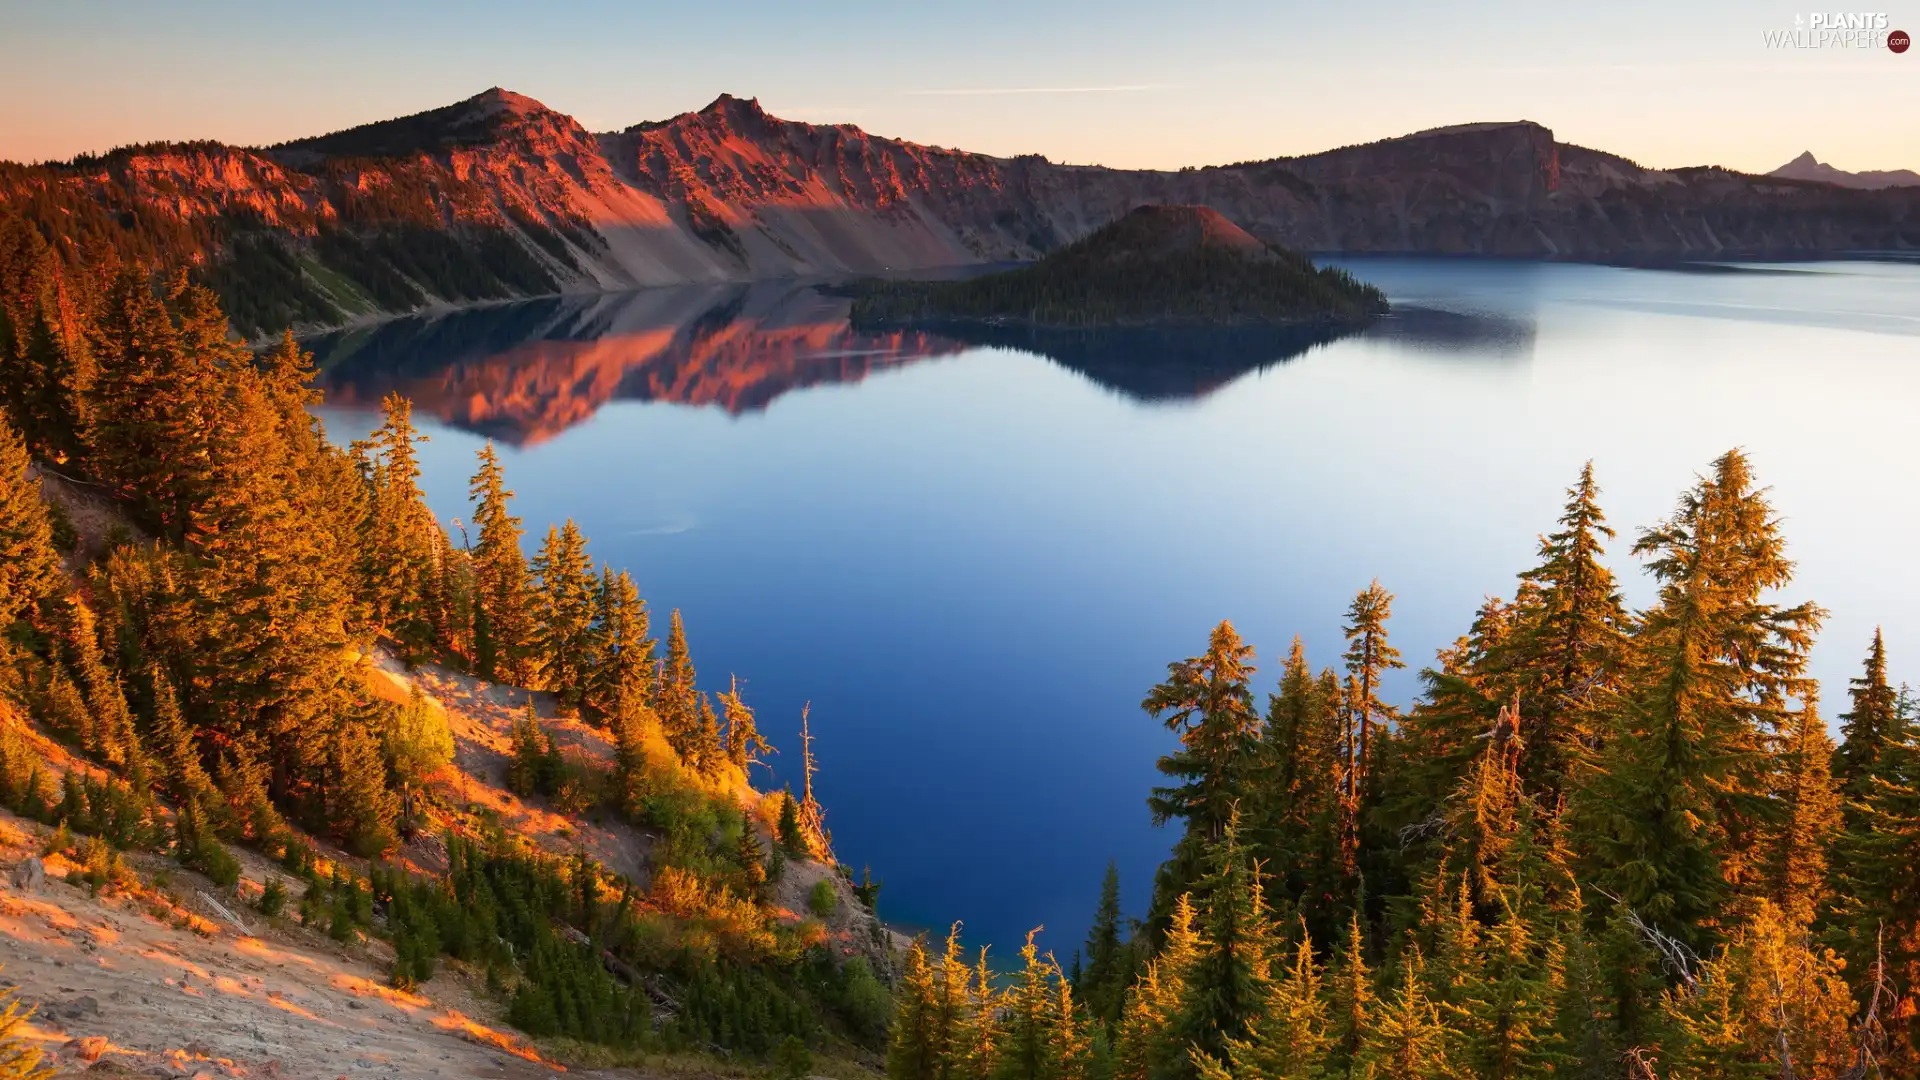 Crater Lake National Park, autumn, Crater Lake, Island of Wizard, State of Oregon, The United States, trees, viewes, Mountains